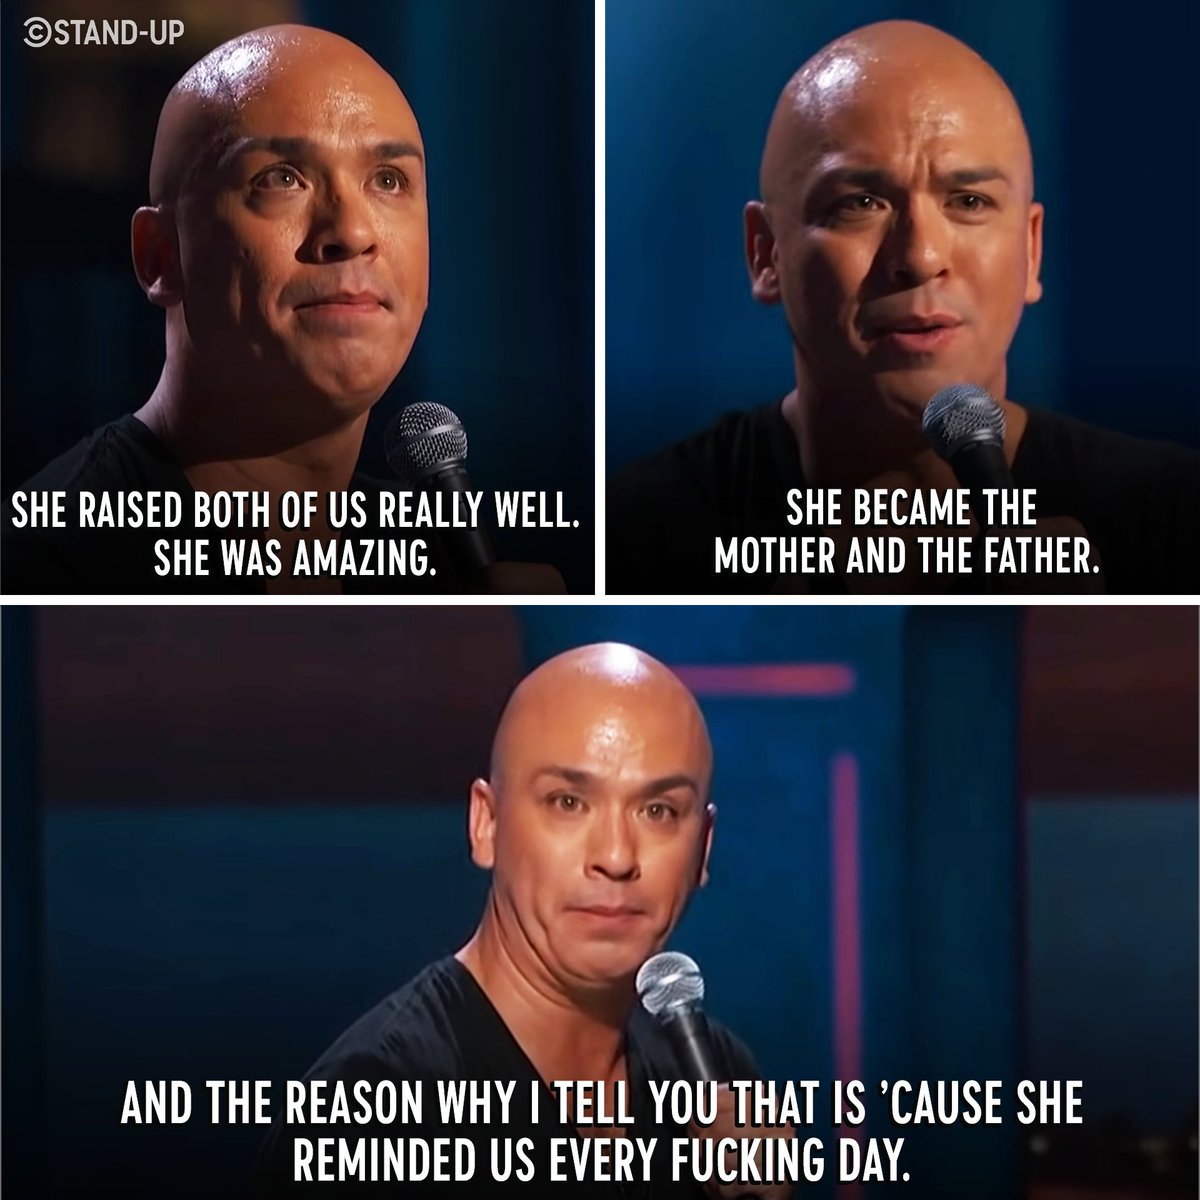 Behind every good joke is a mother. Happy Mother's Day from @Jokoy, @FortuneFeimster, @irene_tu, @BethStelling.